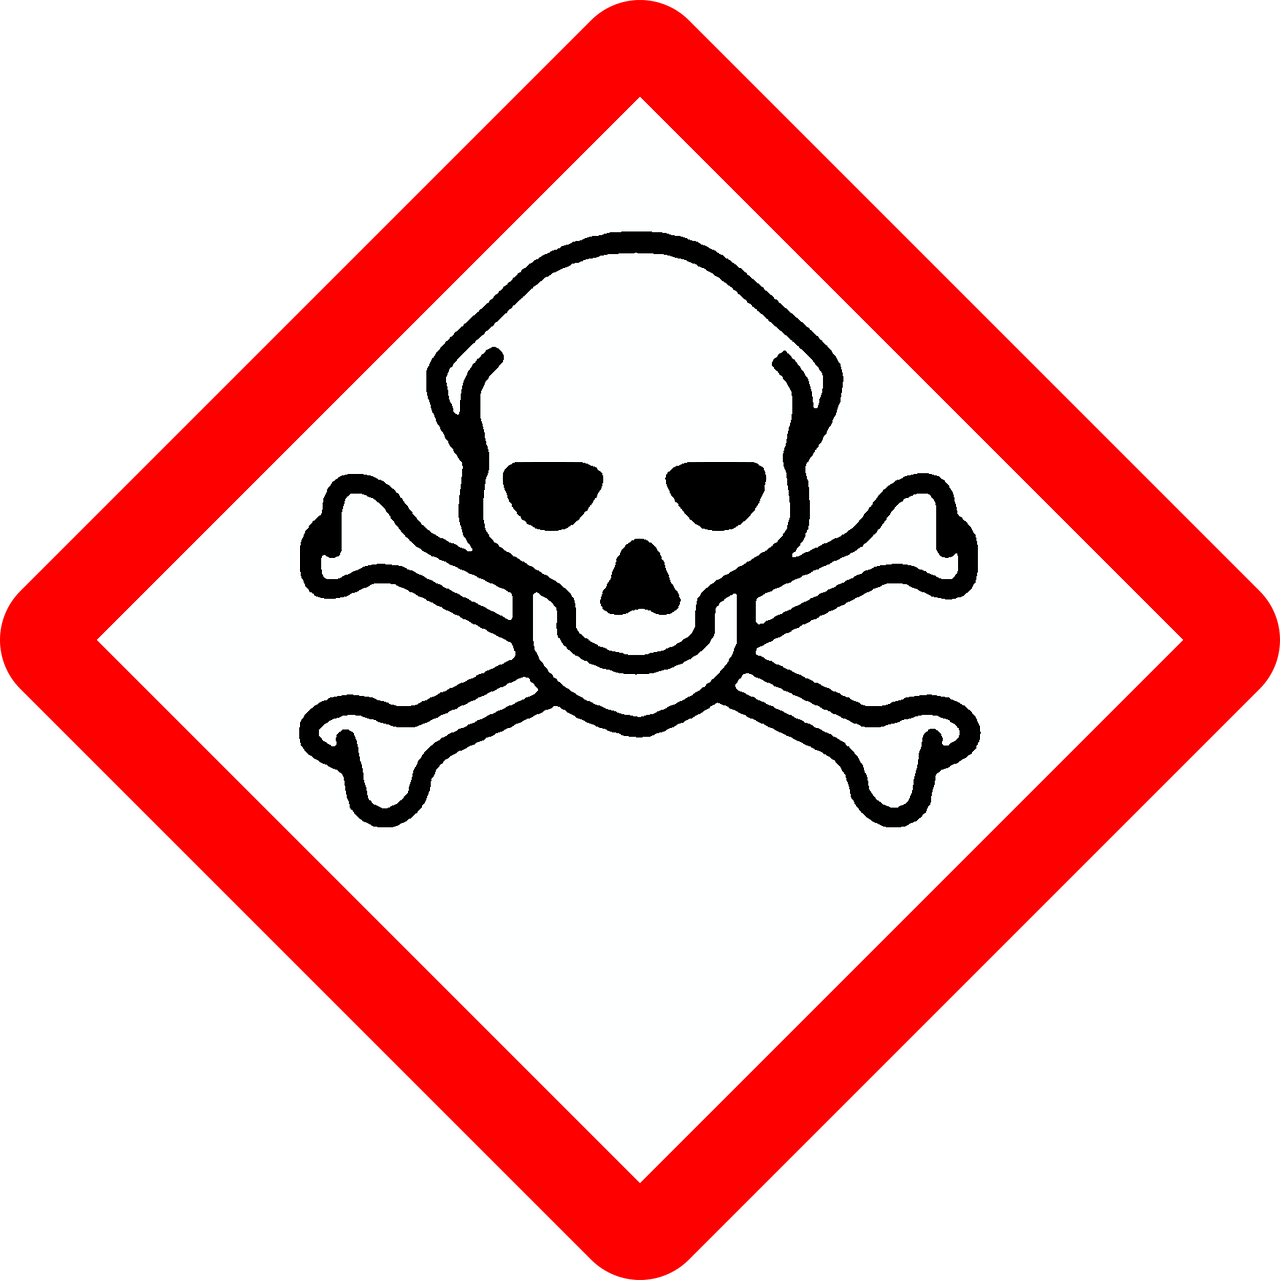 the EU approved symbol for toxic